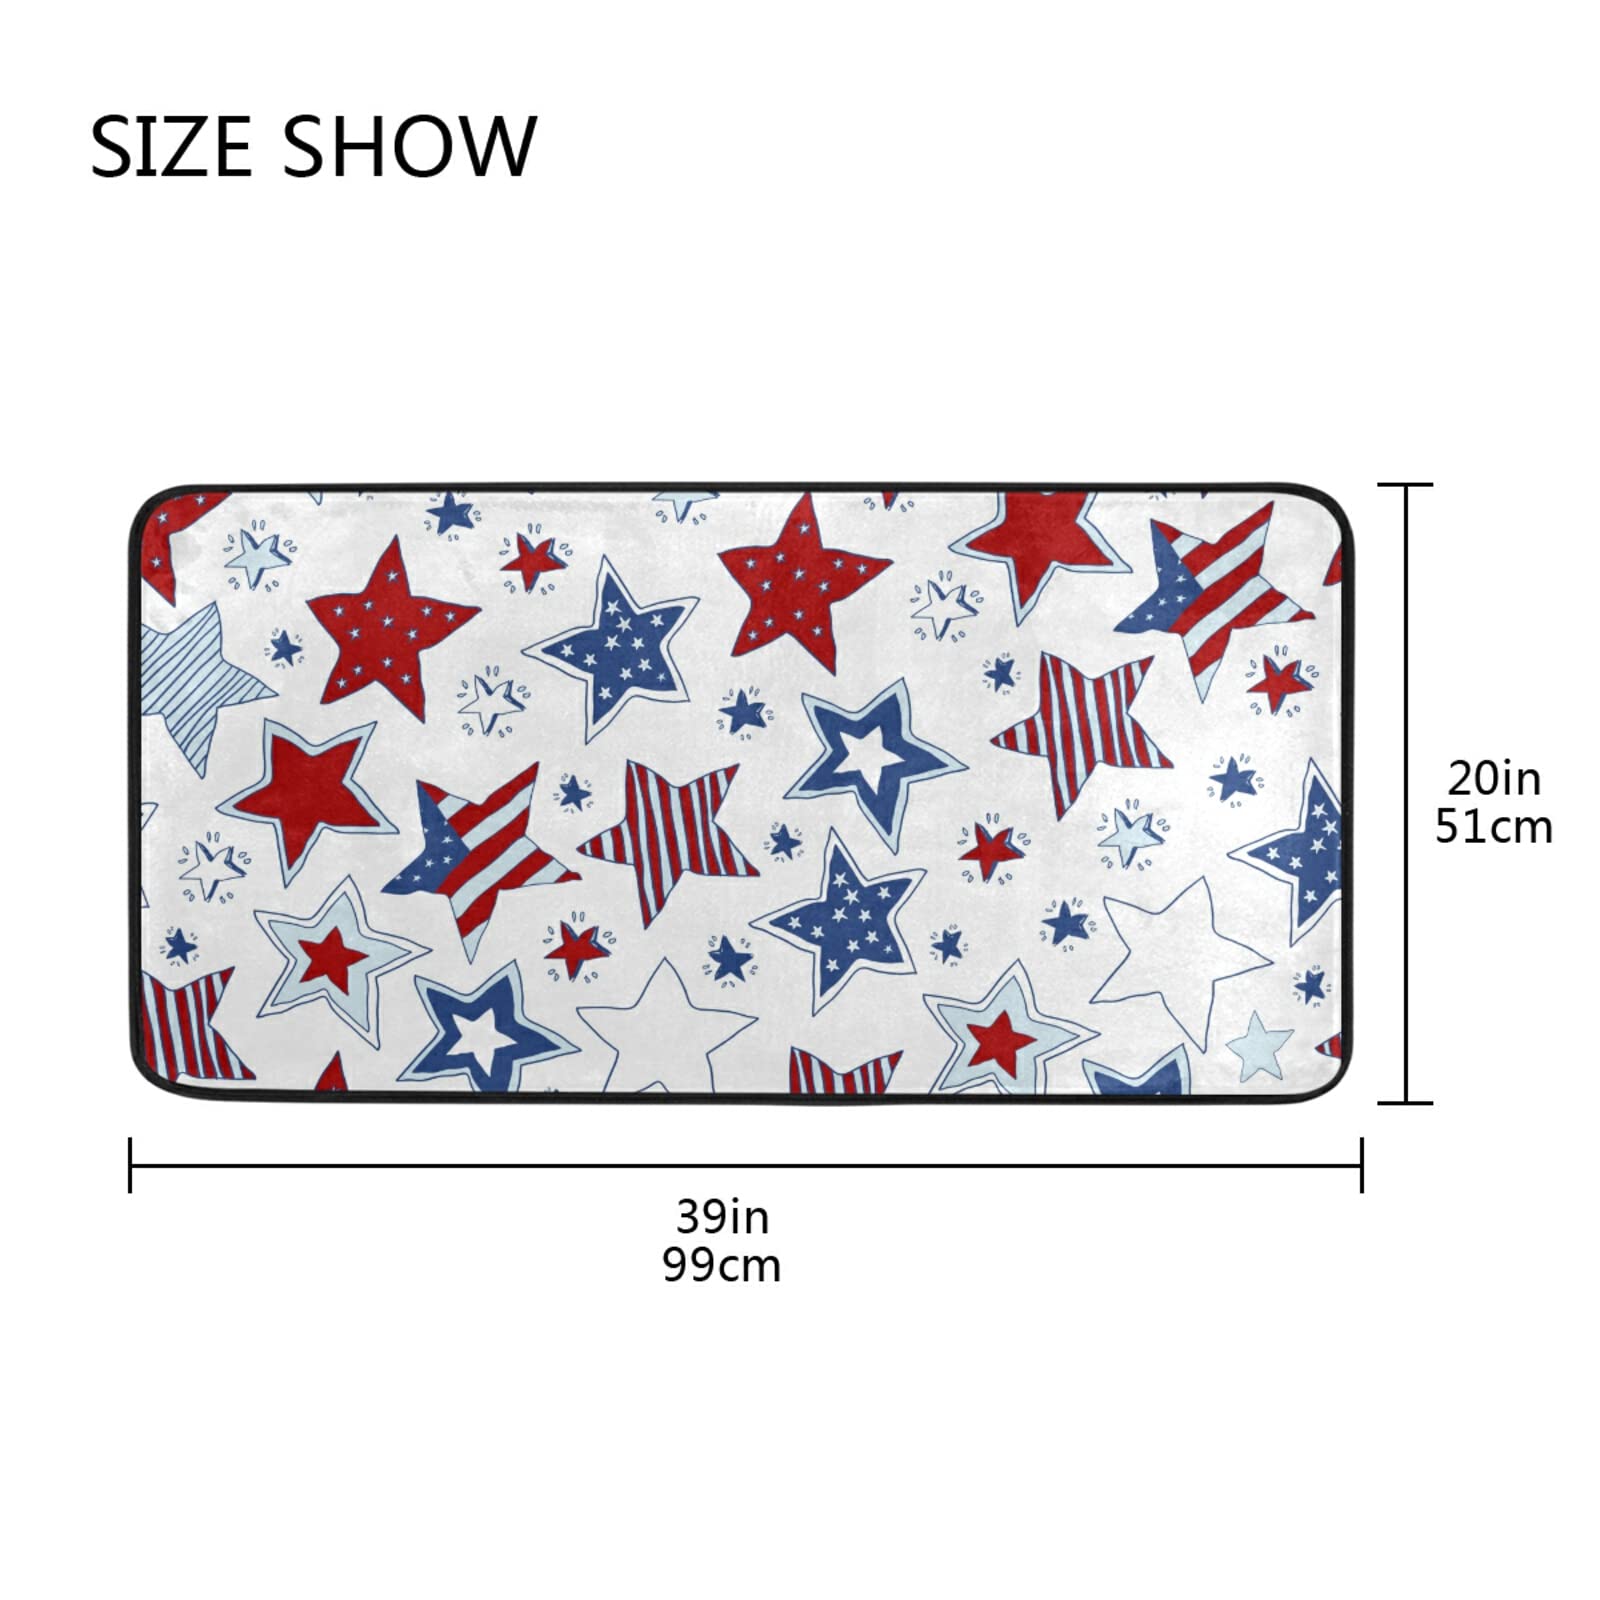 SLHKPNS 4th of July Patriotic Kitchen Rugs,American Flag Rug Non-Slip Kitchen Mat Comfort Runner Doormat 39x20 Inch Soft Floor Mat for Home Decor